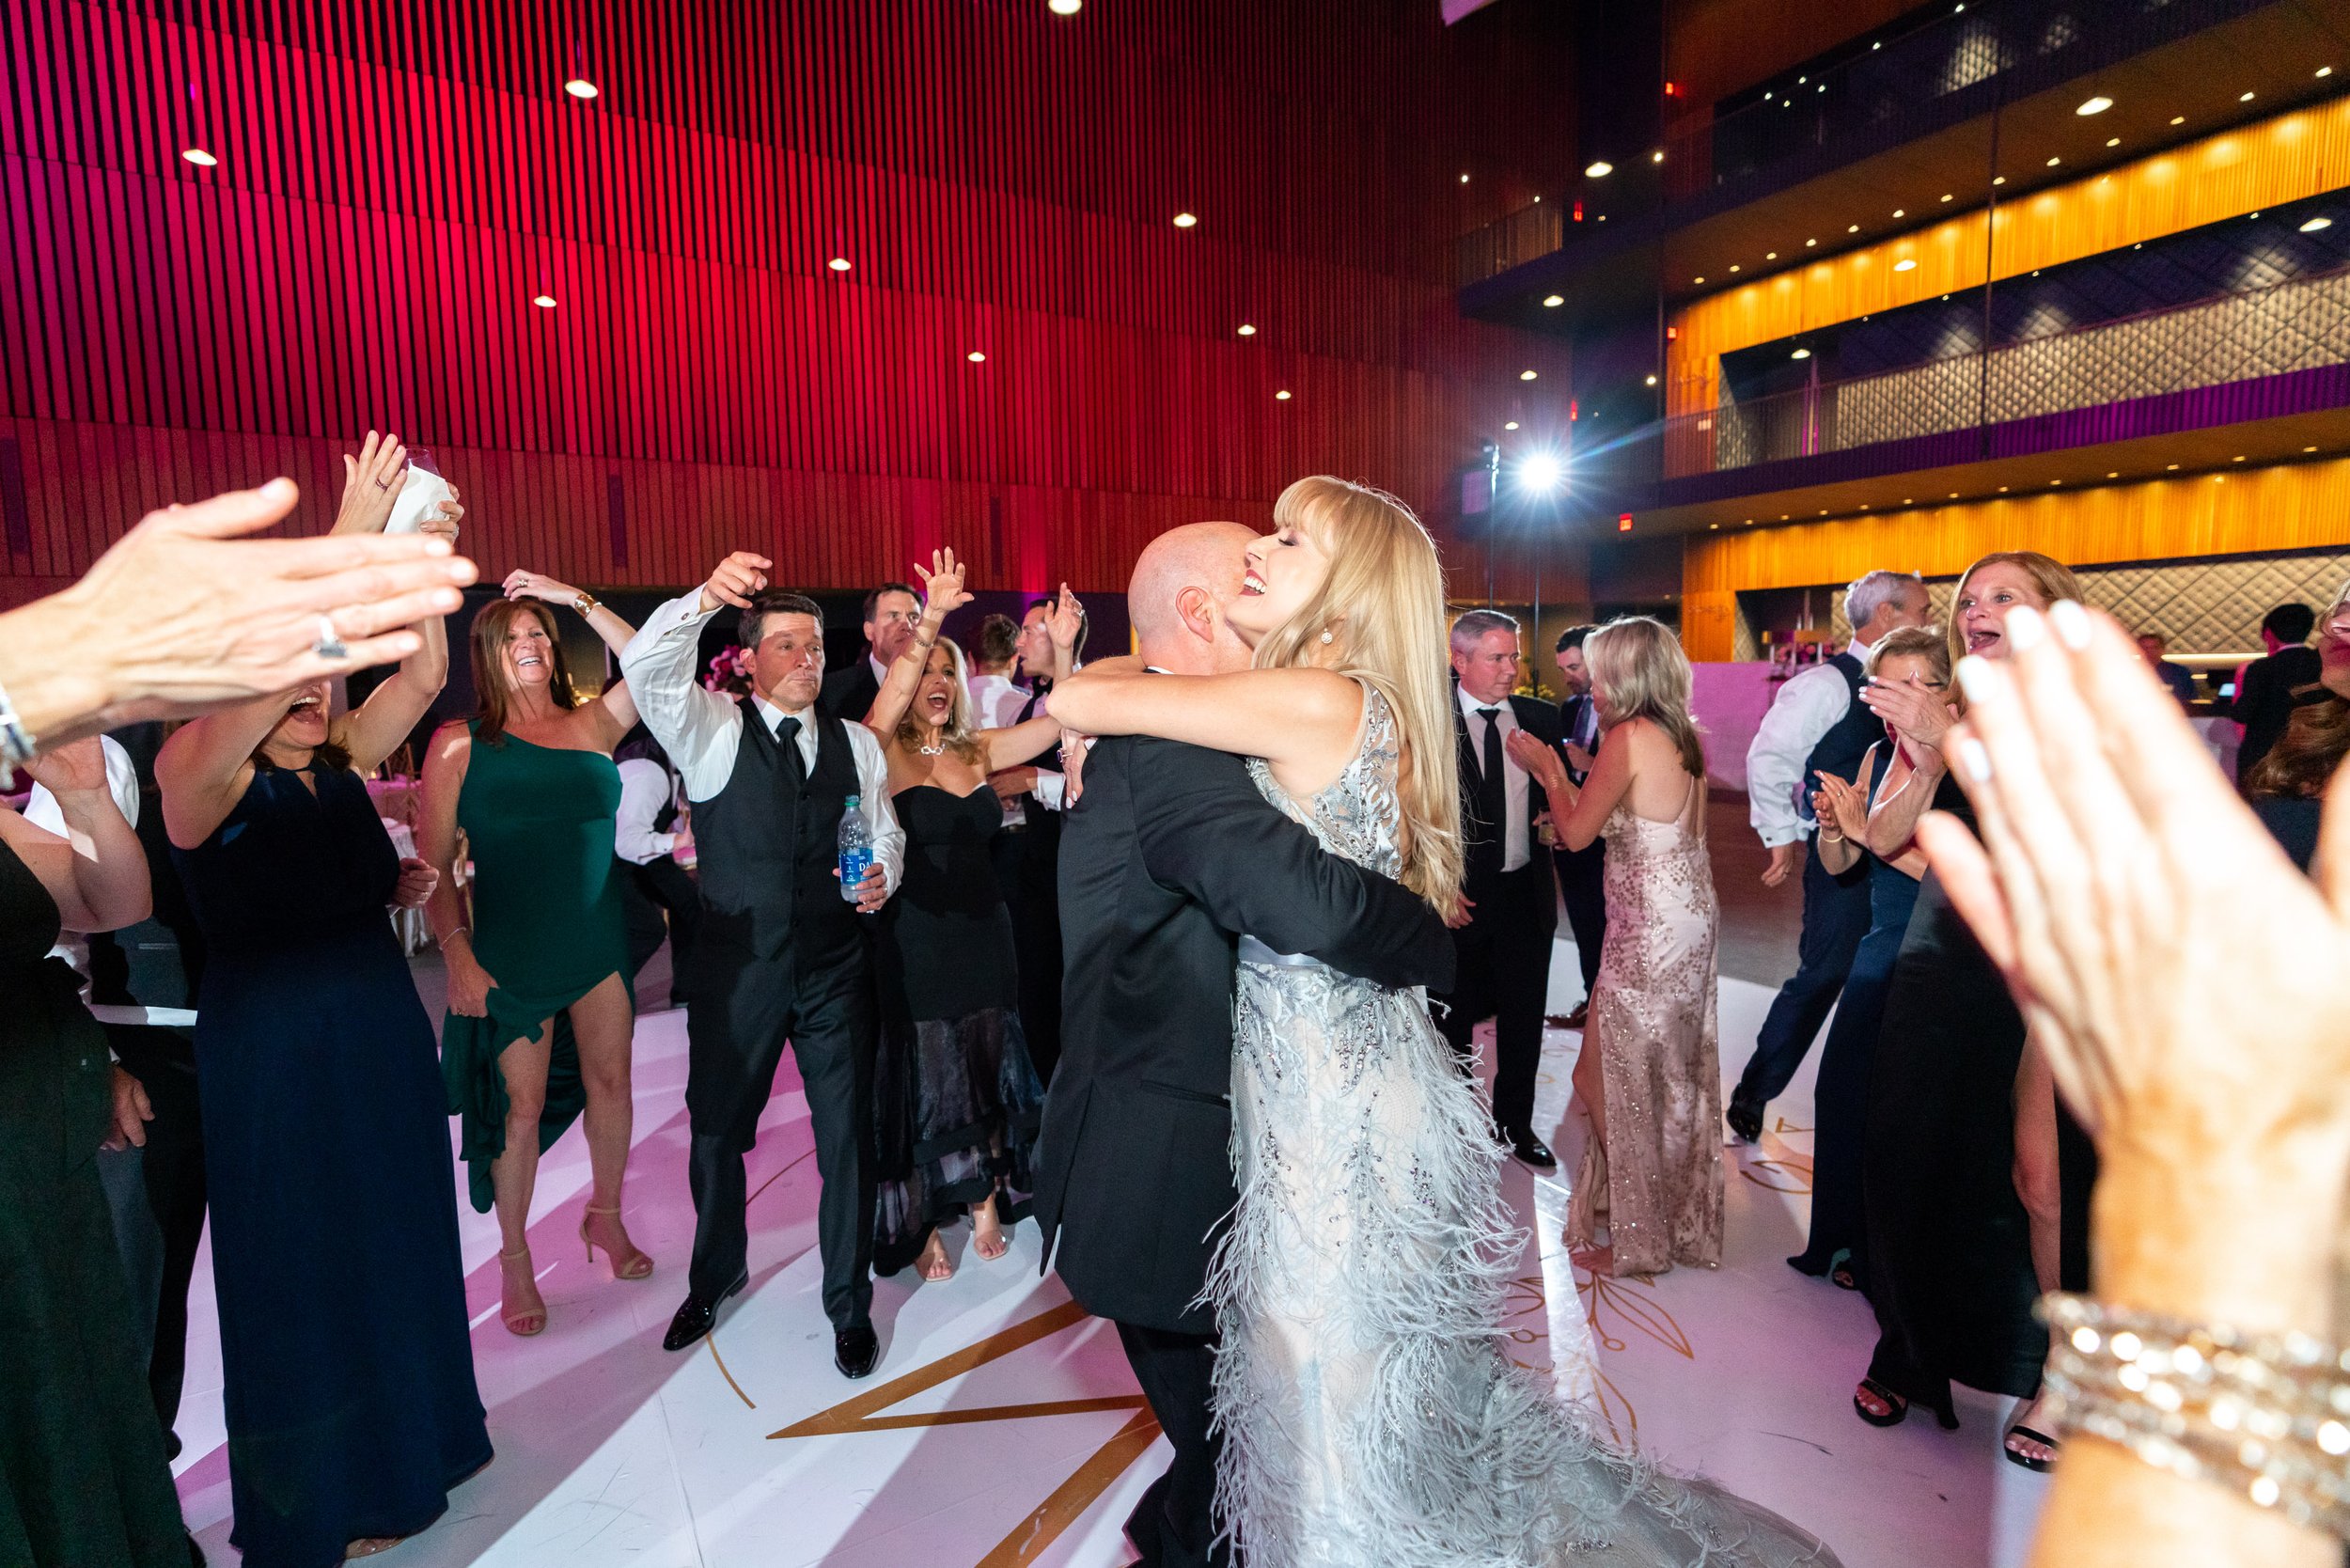 Parents of the bride spin and kiss on the dance floor surrounded by guests